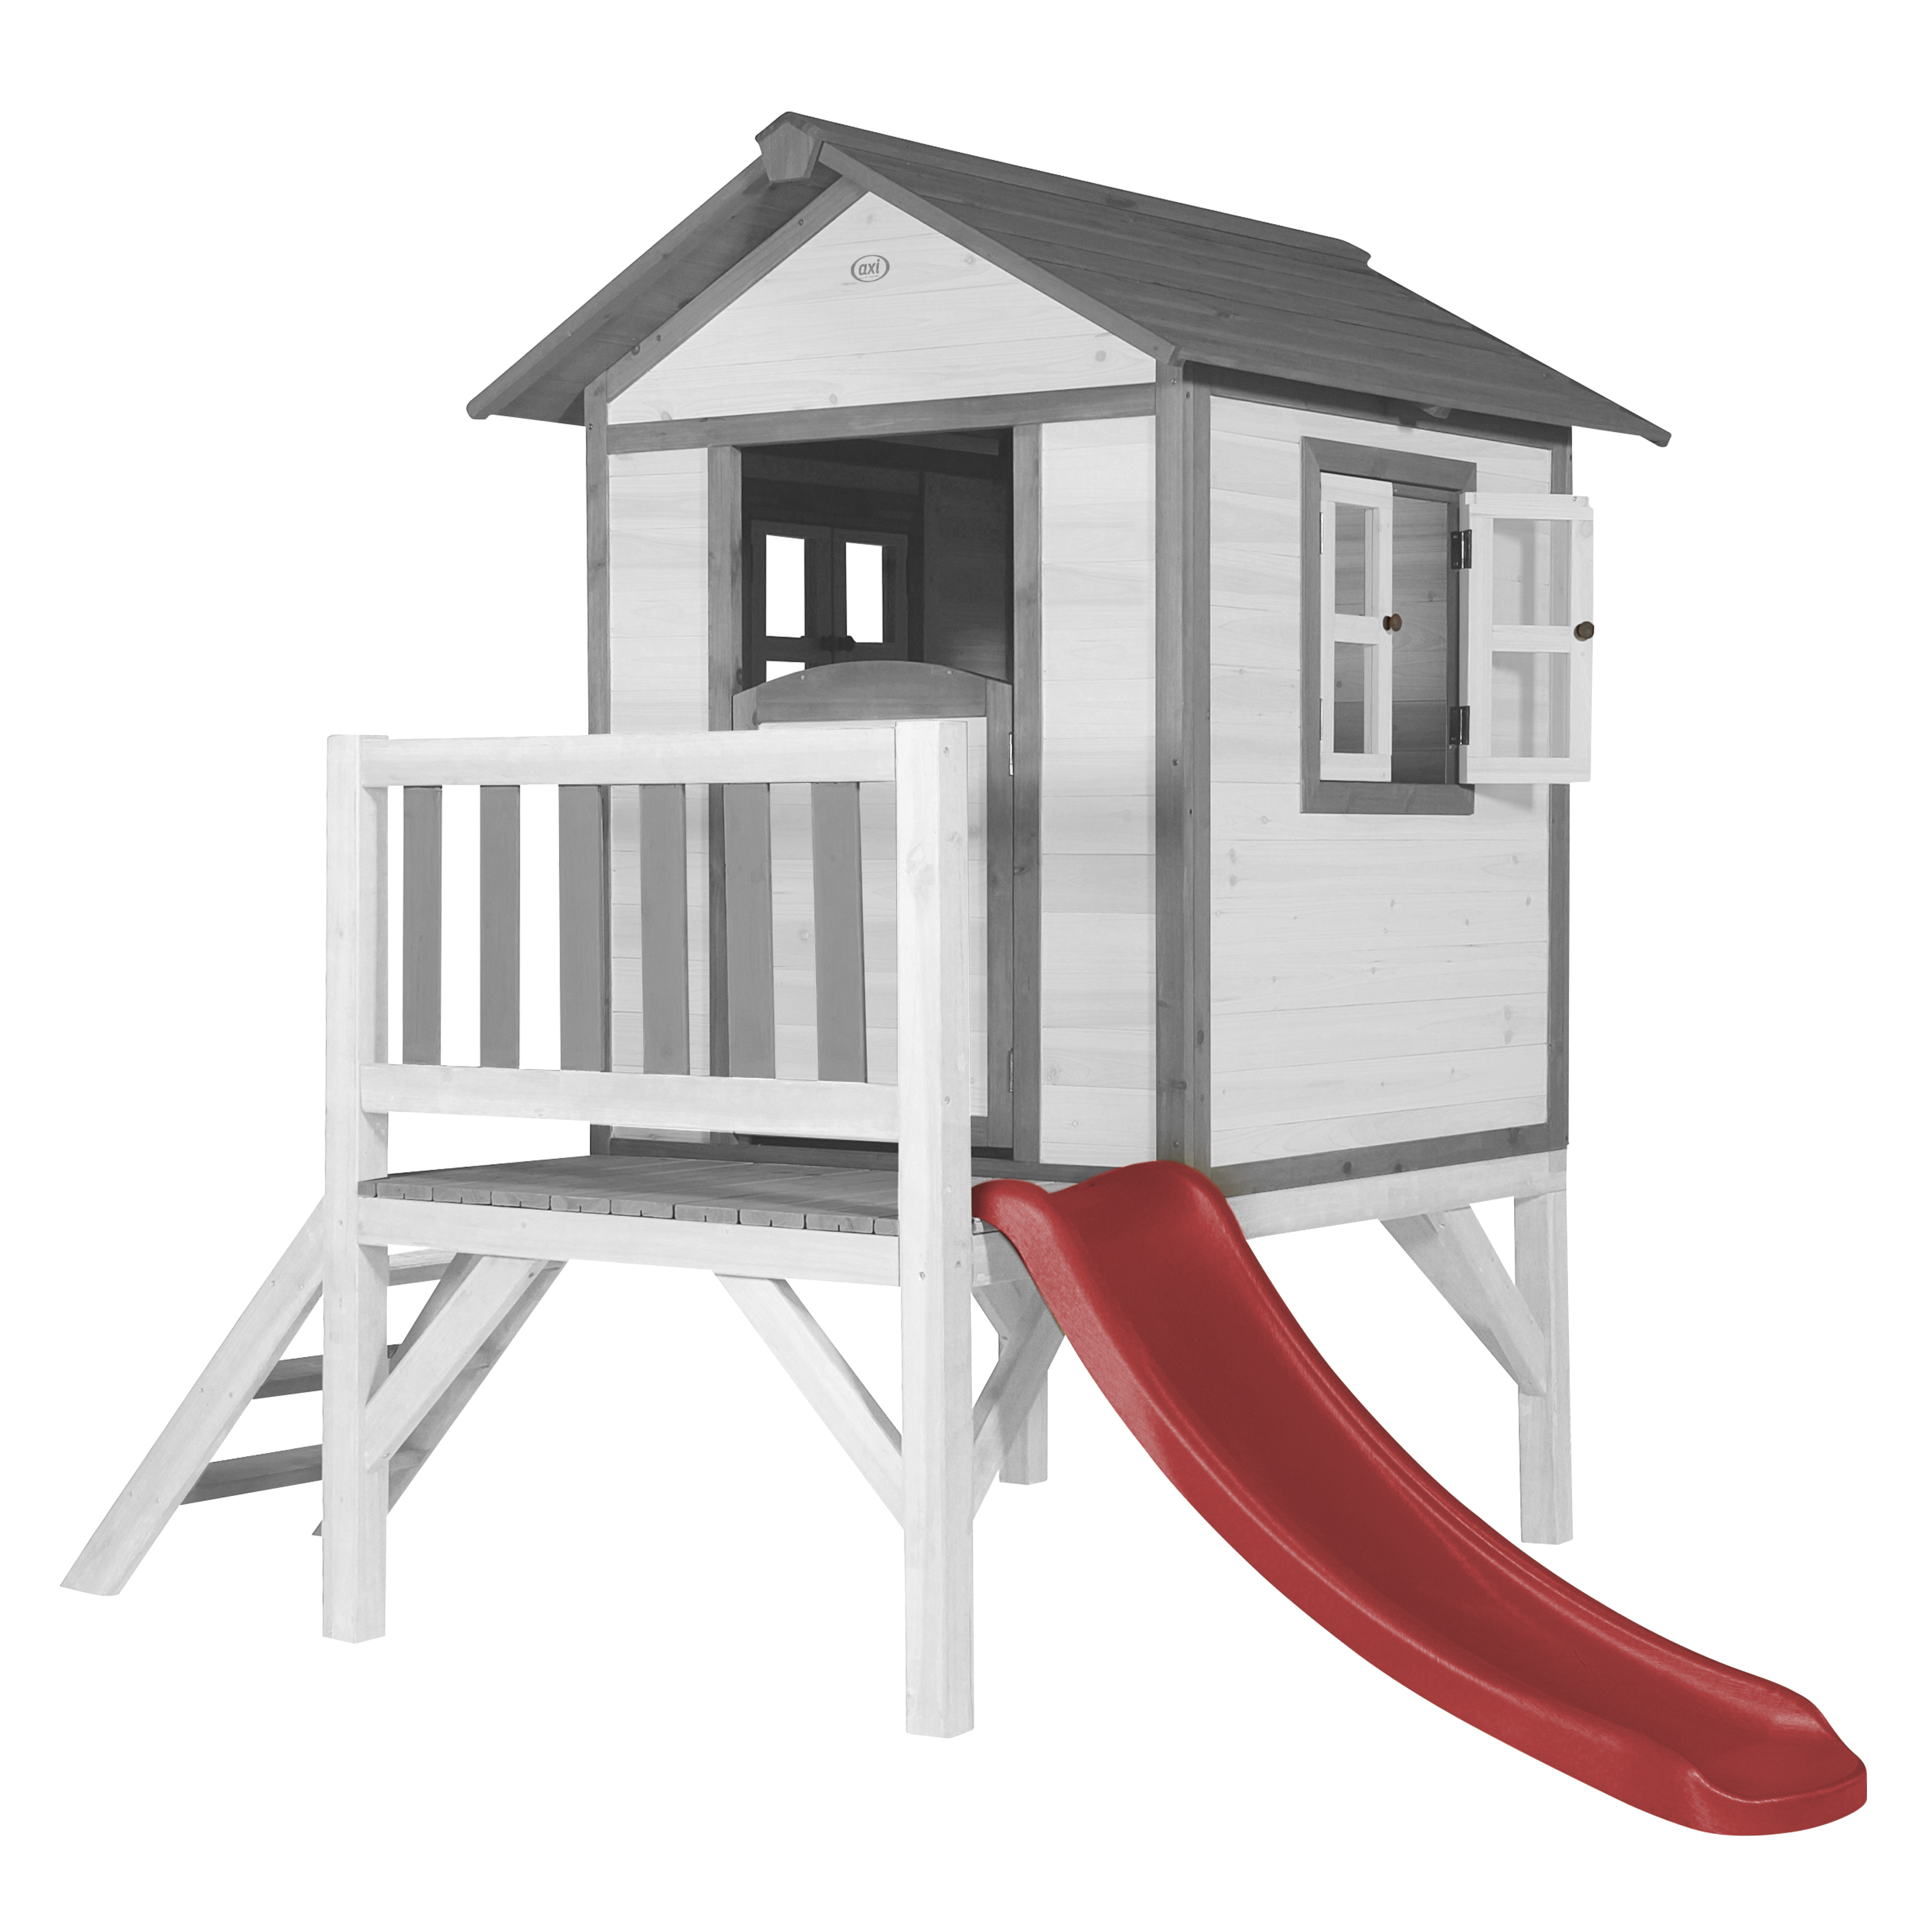 Lodge XL Playhouse Classic - Red Slide